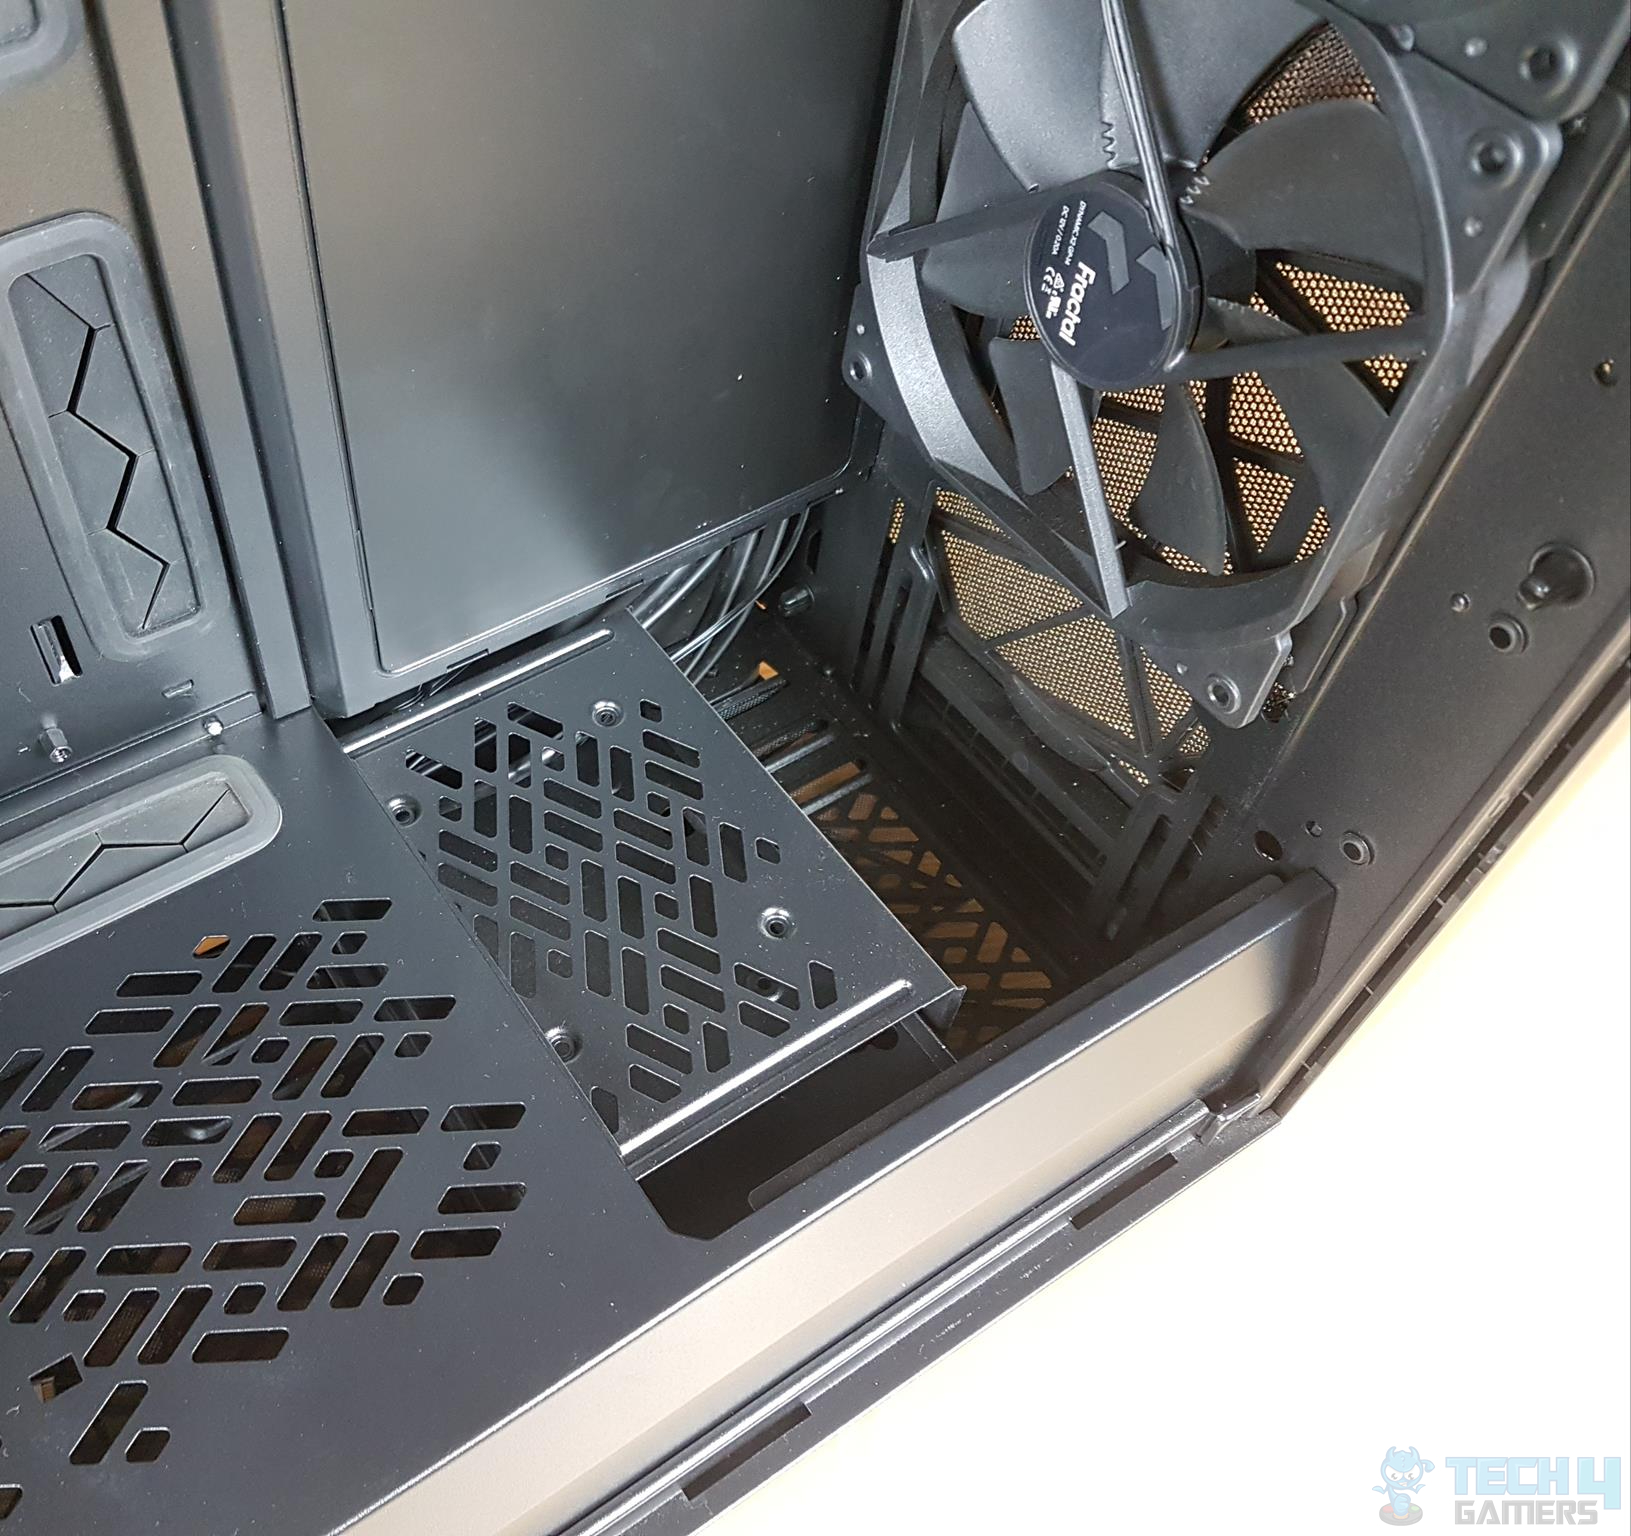 Fractal Design Meshify 2 — The plastic cover area